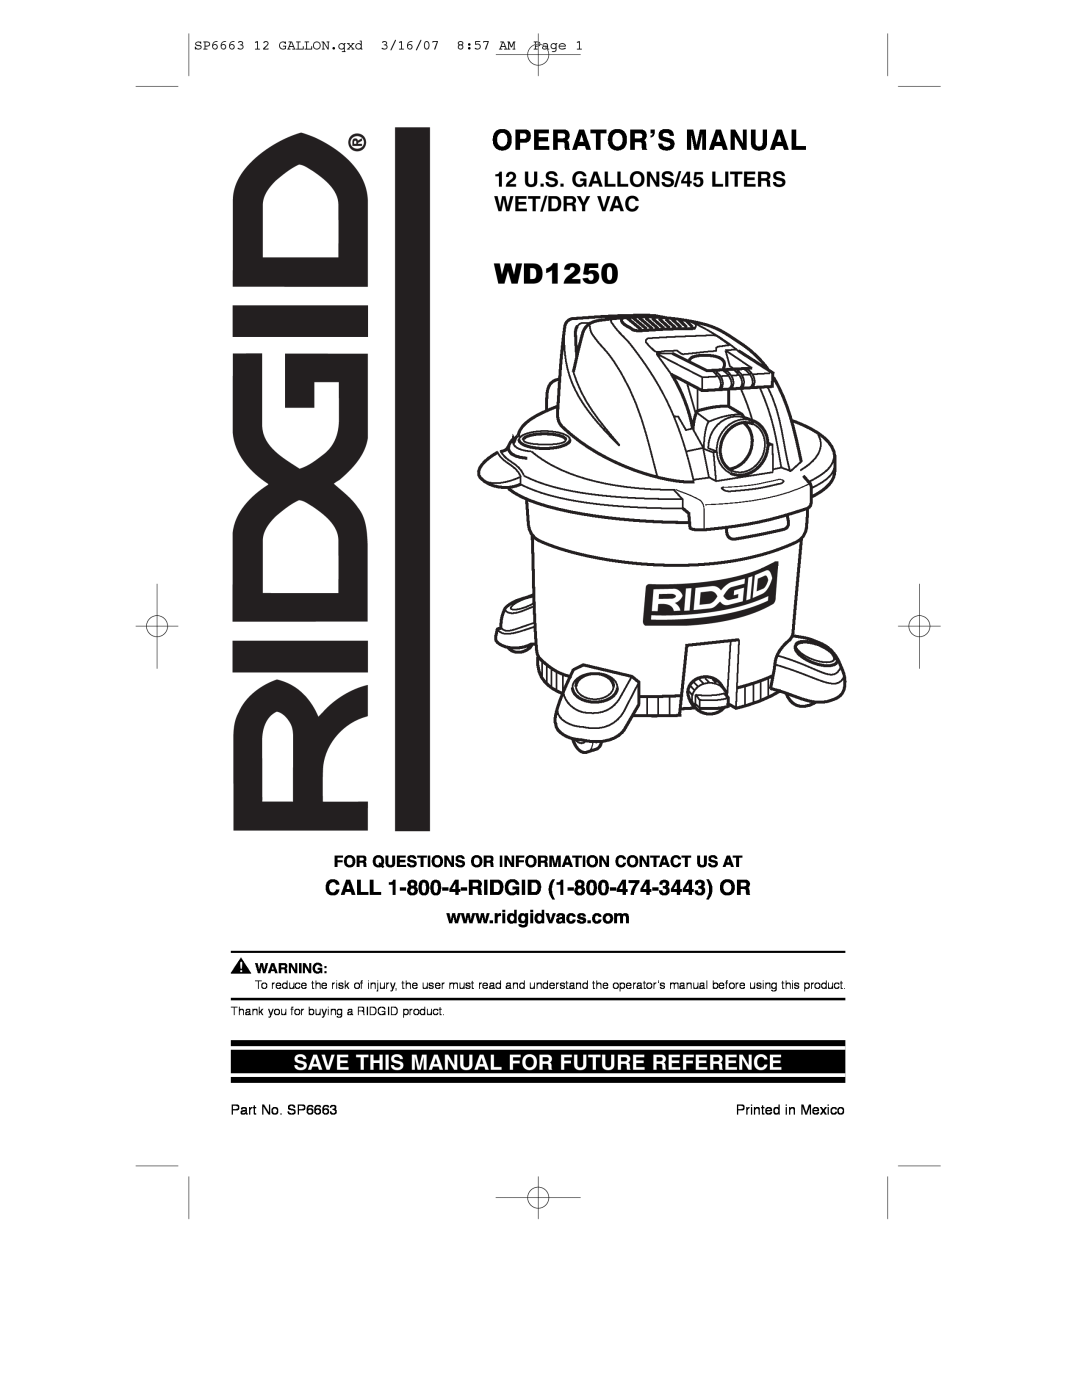 RIDGID WD1250 manual 12 U.S. GALLONS/45 LITERS WET/DRY VAC, Save This Manual For Future Reference 